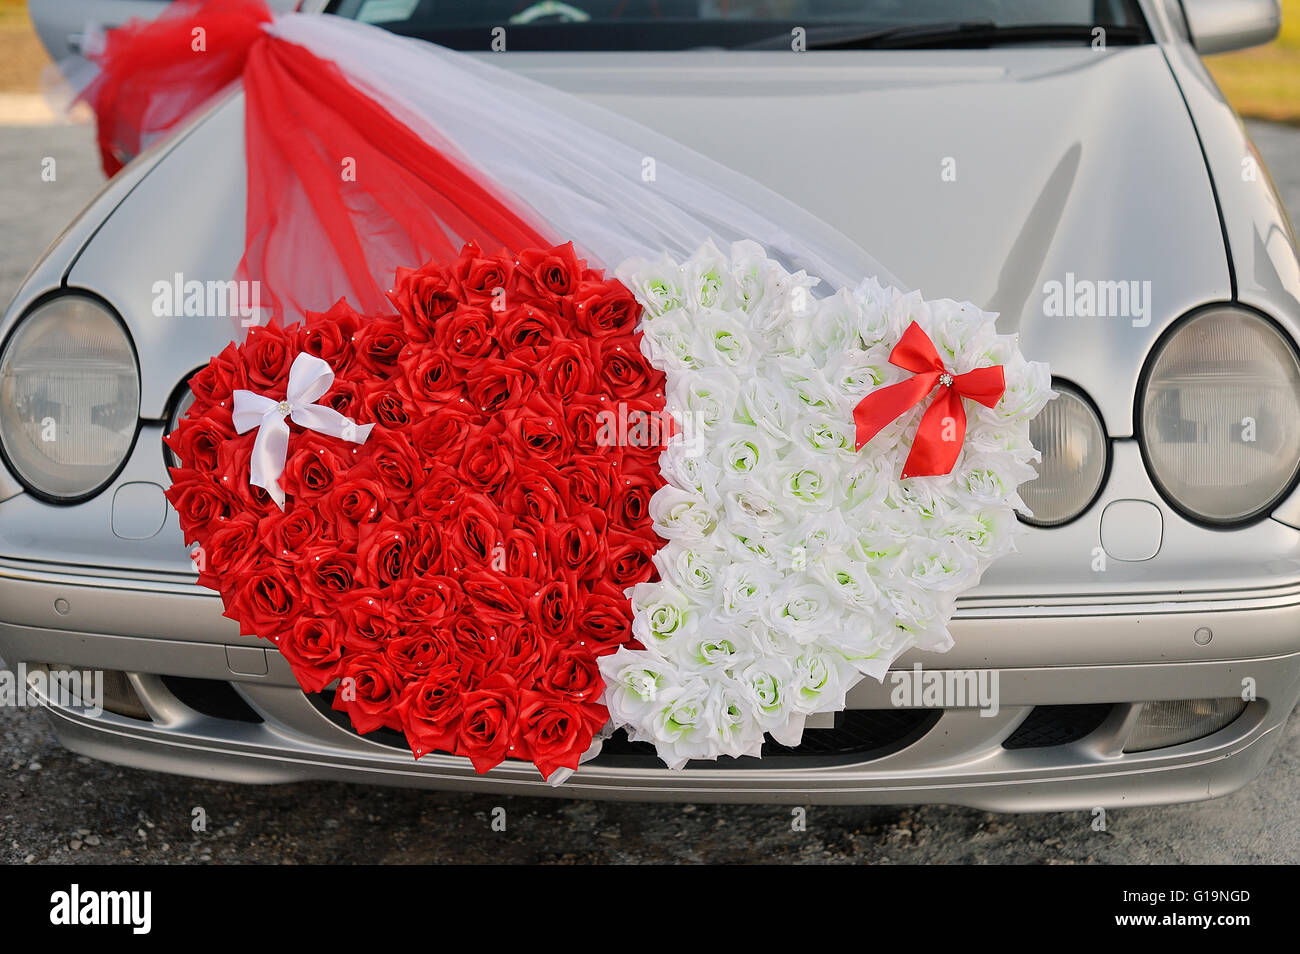 https://c8.alamy.com/comp/G19NGD/wedding-car-decorated-with-two-hearts-made-of-flowers-G19NGD.jpg